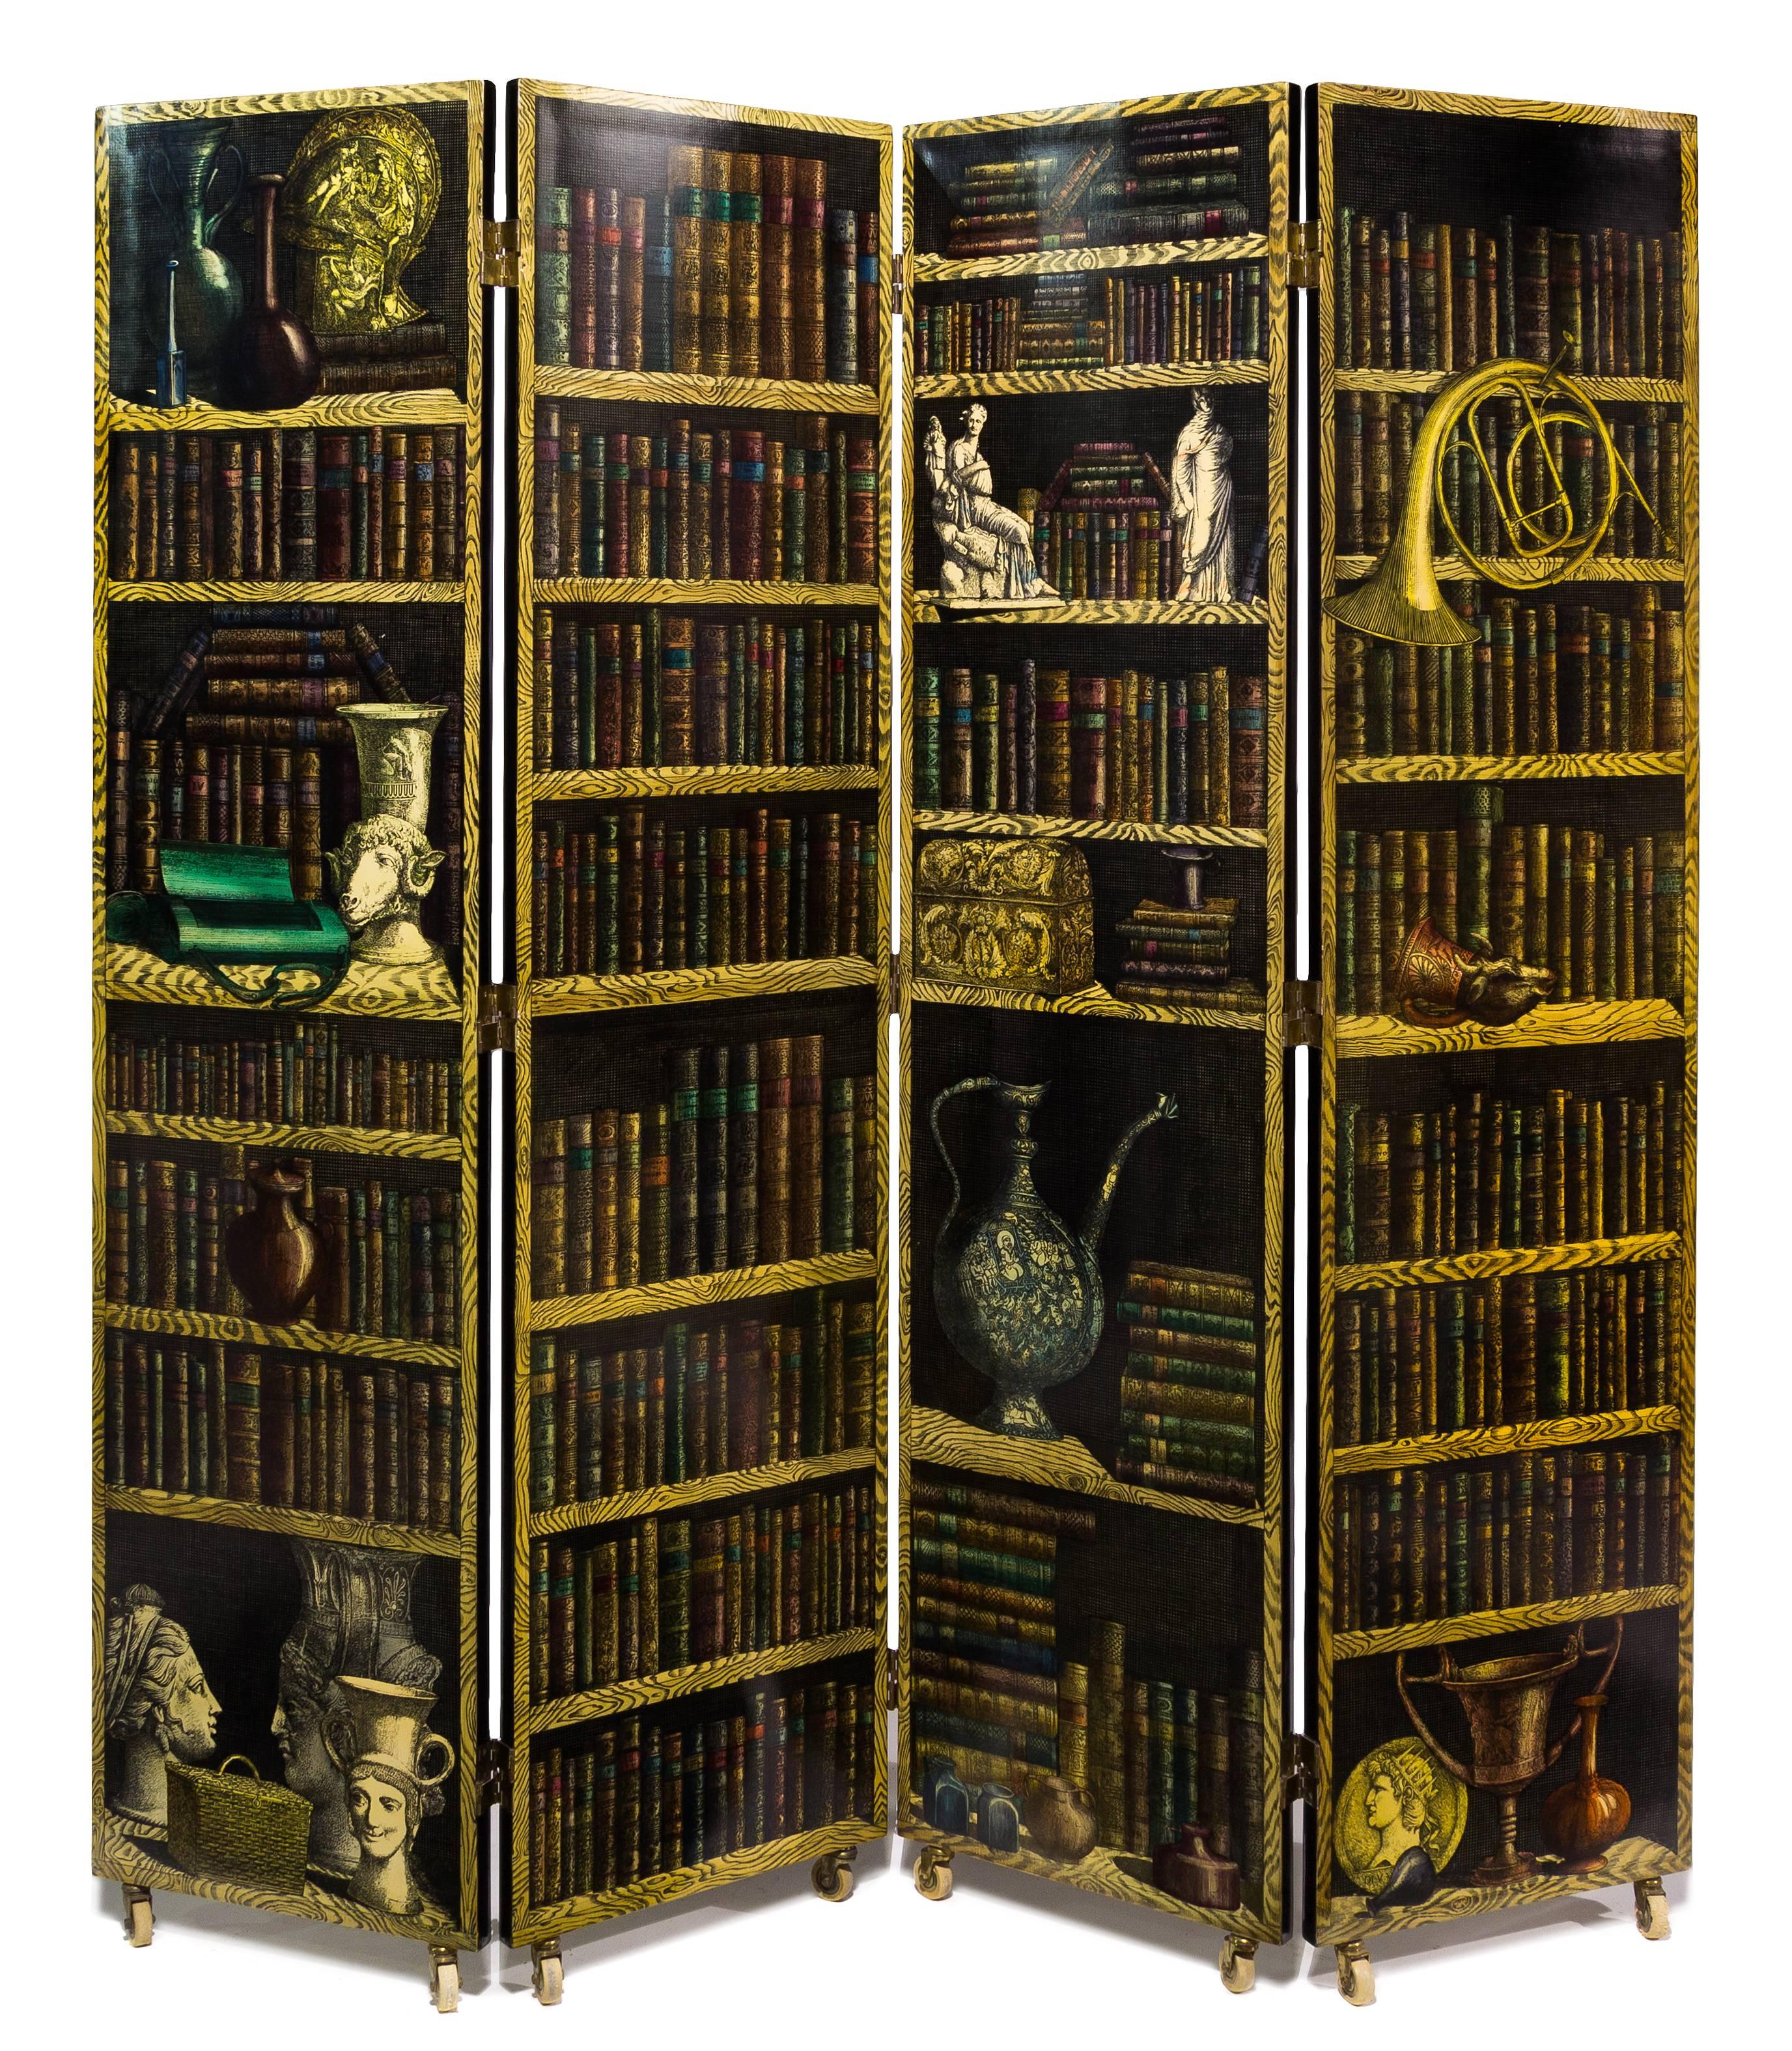 Early Piero Fornasetti Four Panel Folding Screen with La Citta Riflettente to one side and Libreria on reverse, 
1950s.

The screen is in wonderful condition It is double-sided with the Library design to one side and Reflective City to the other.